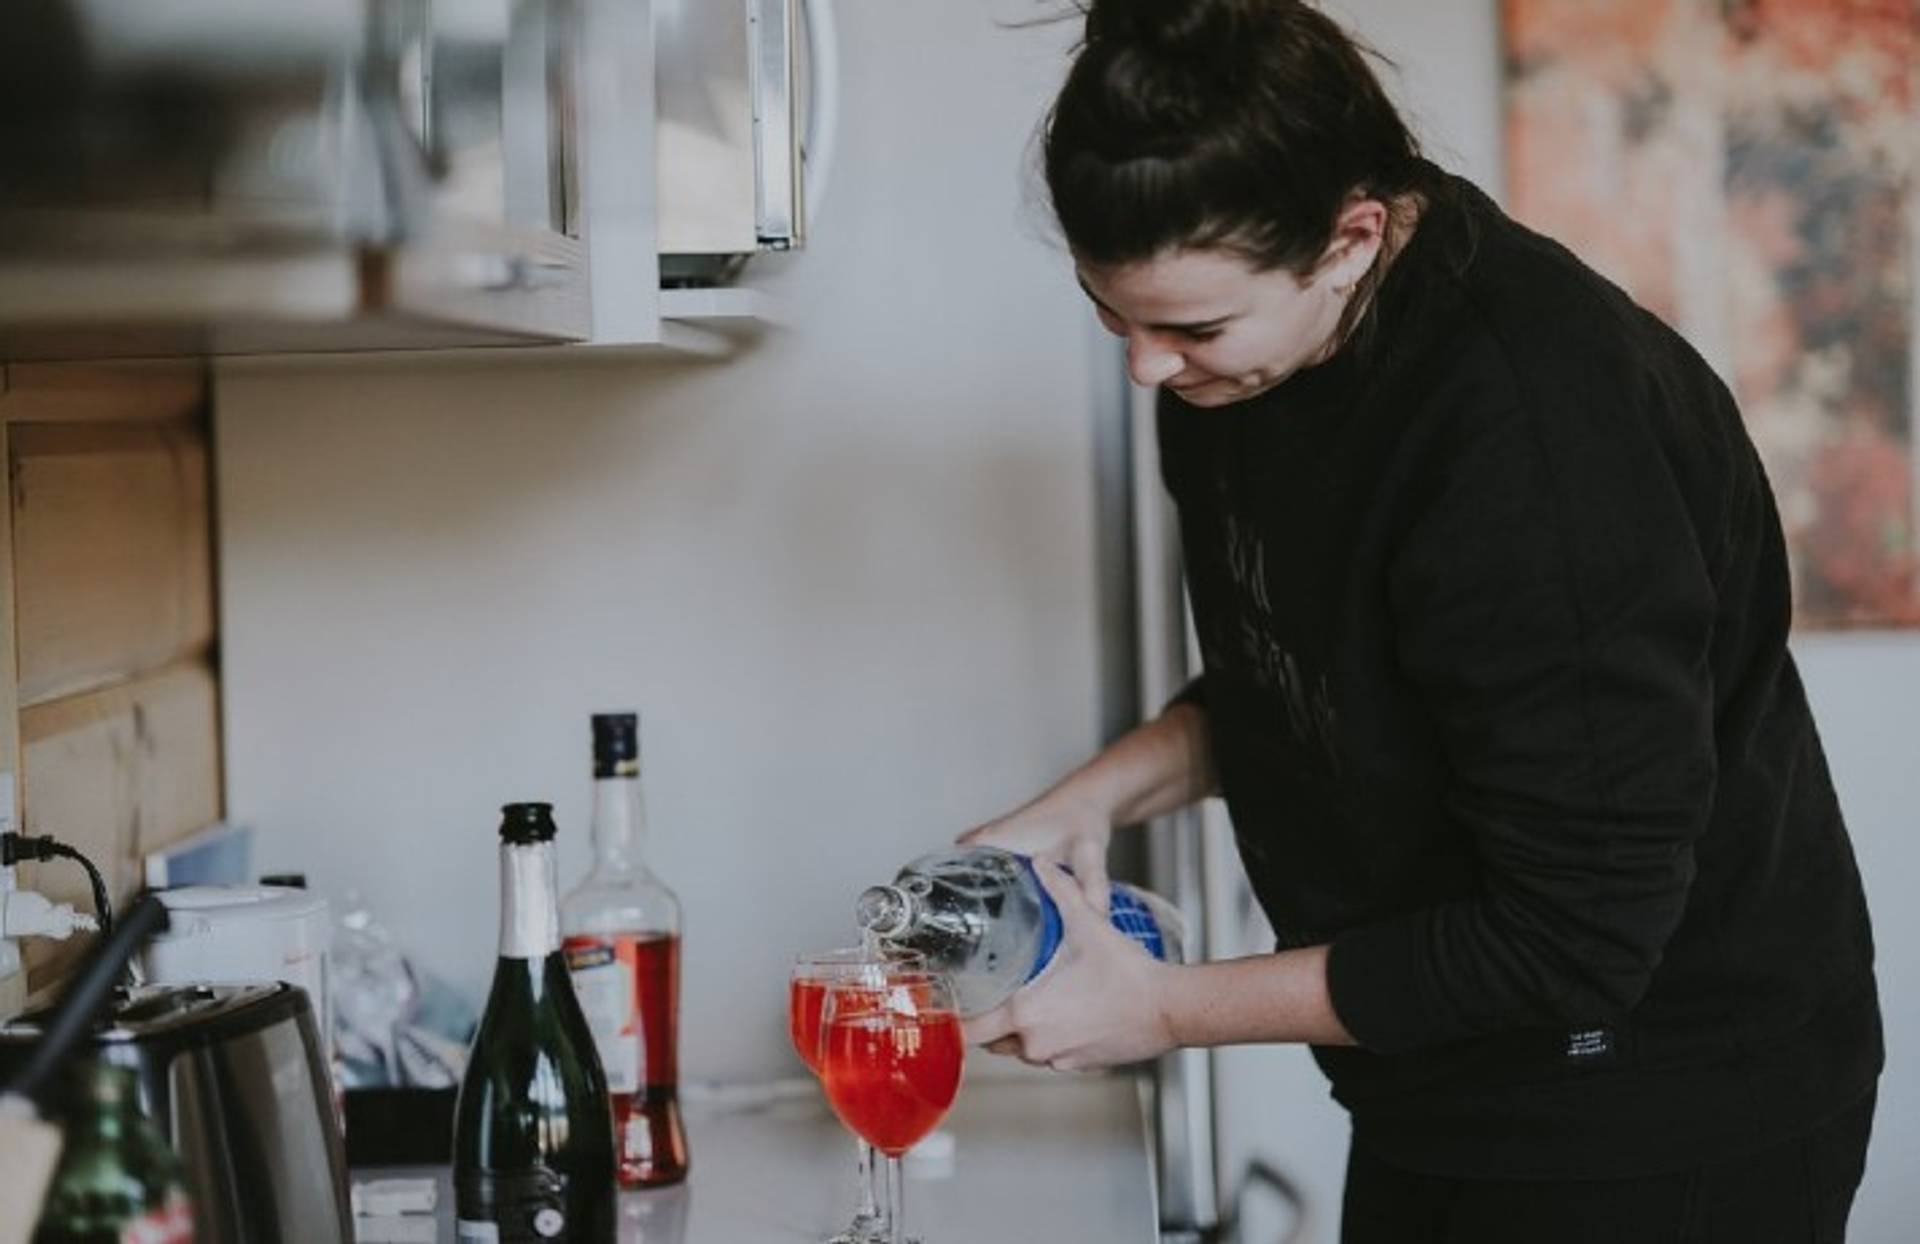 Bacardi’s pods simplify at-home cocktail making